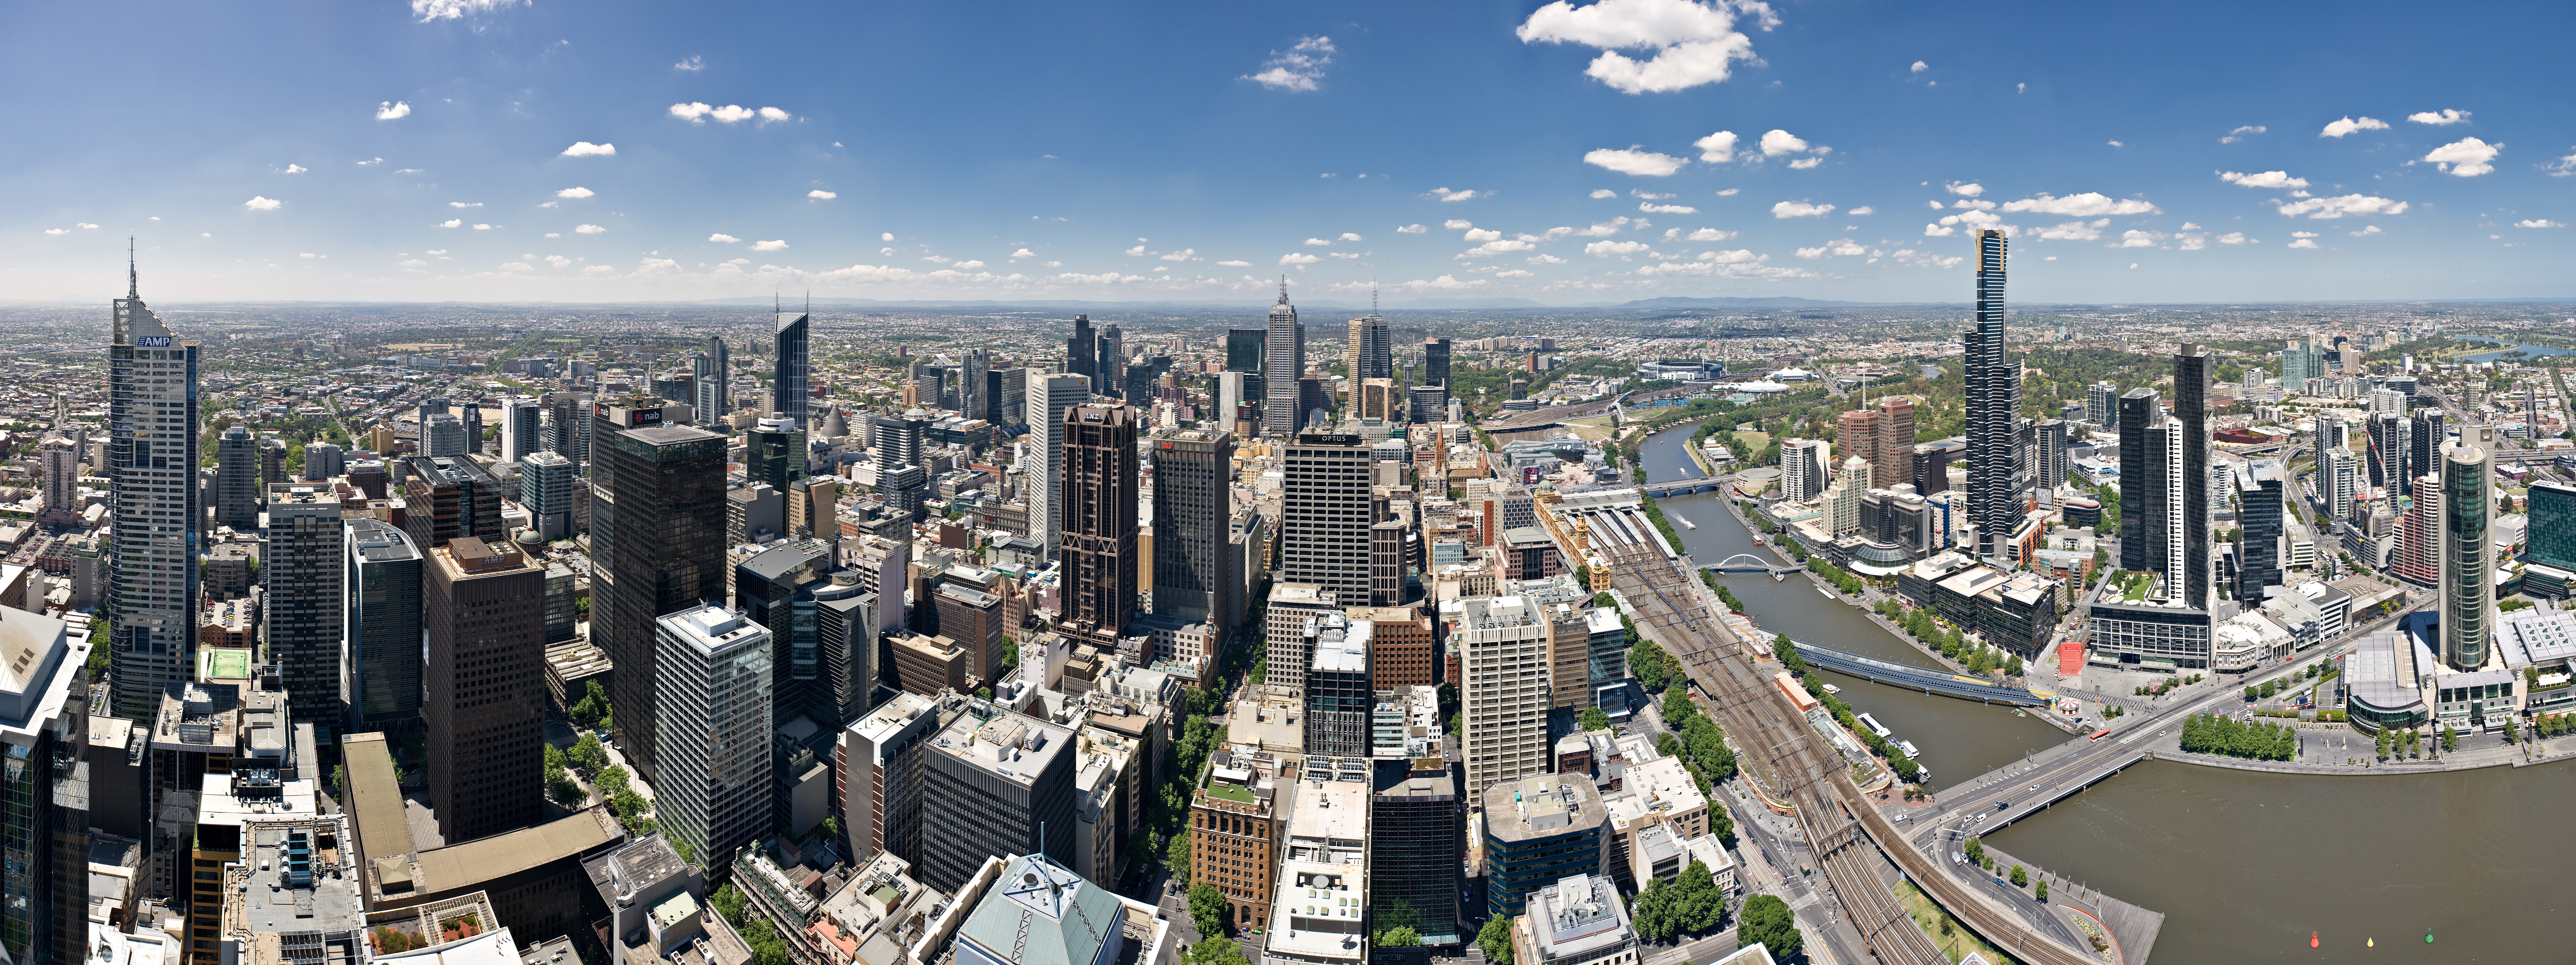 Melbourne - Wikimedia Commons